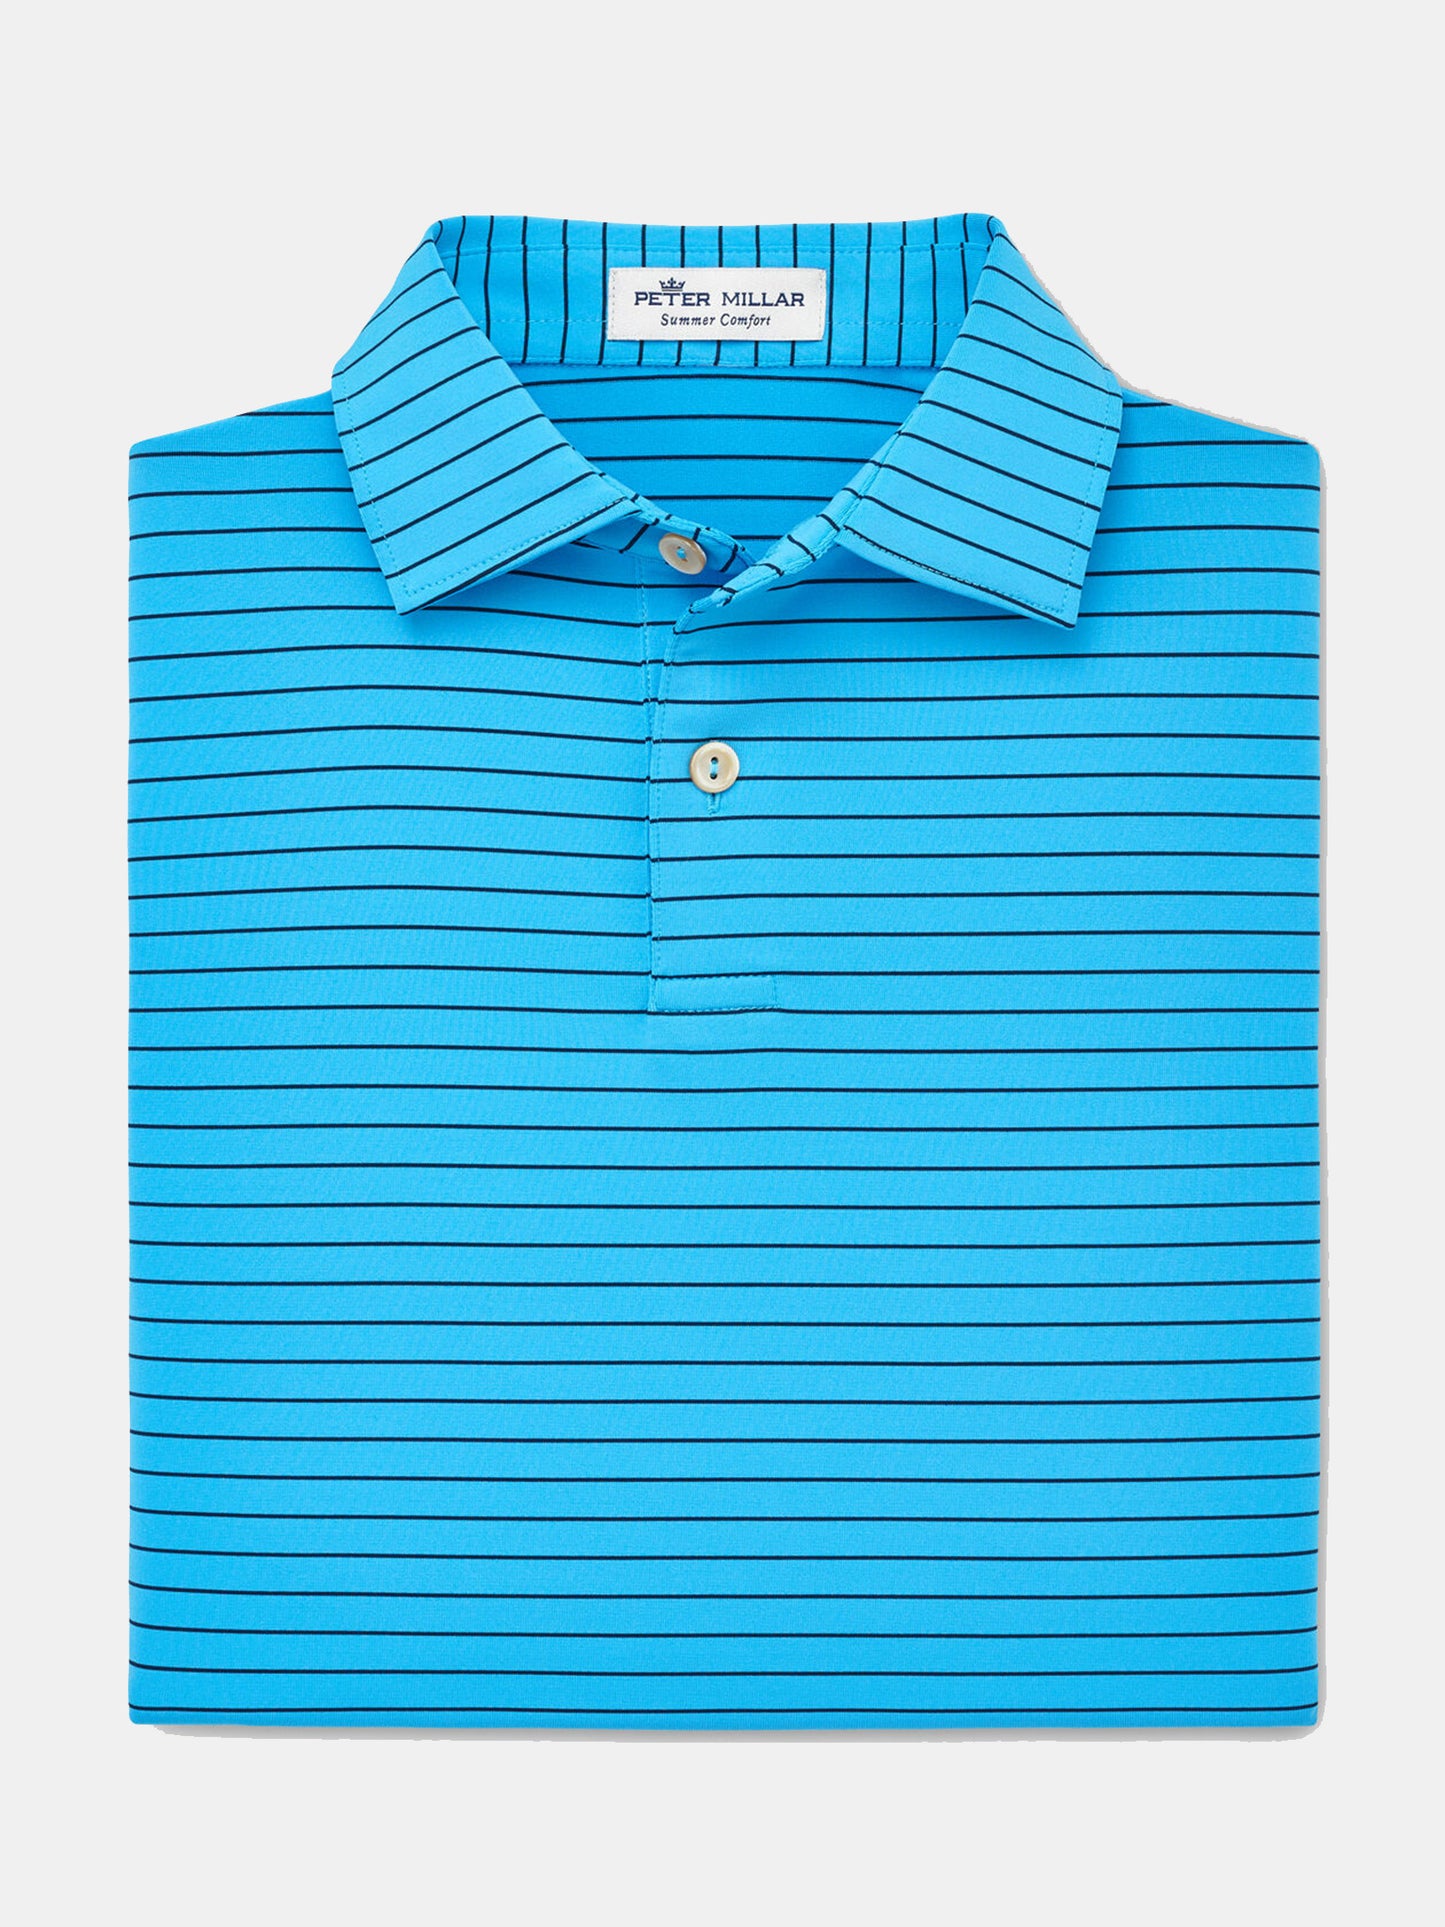 Peter Millar Youth Collection Boys' Crafty Performance Polo